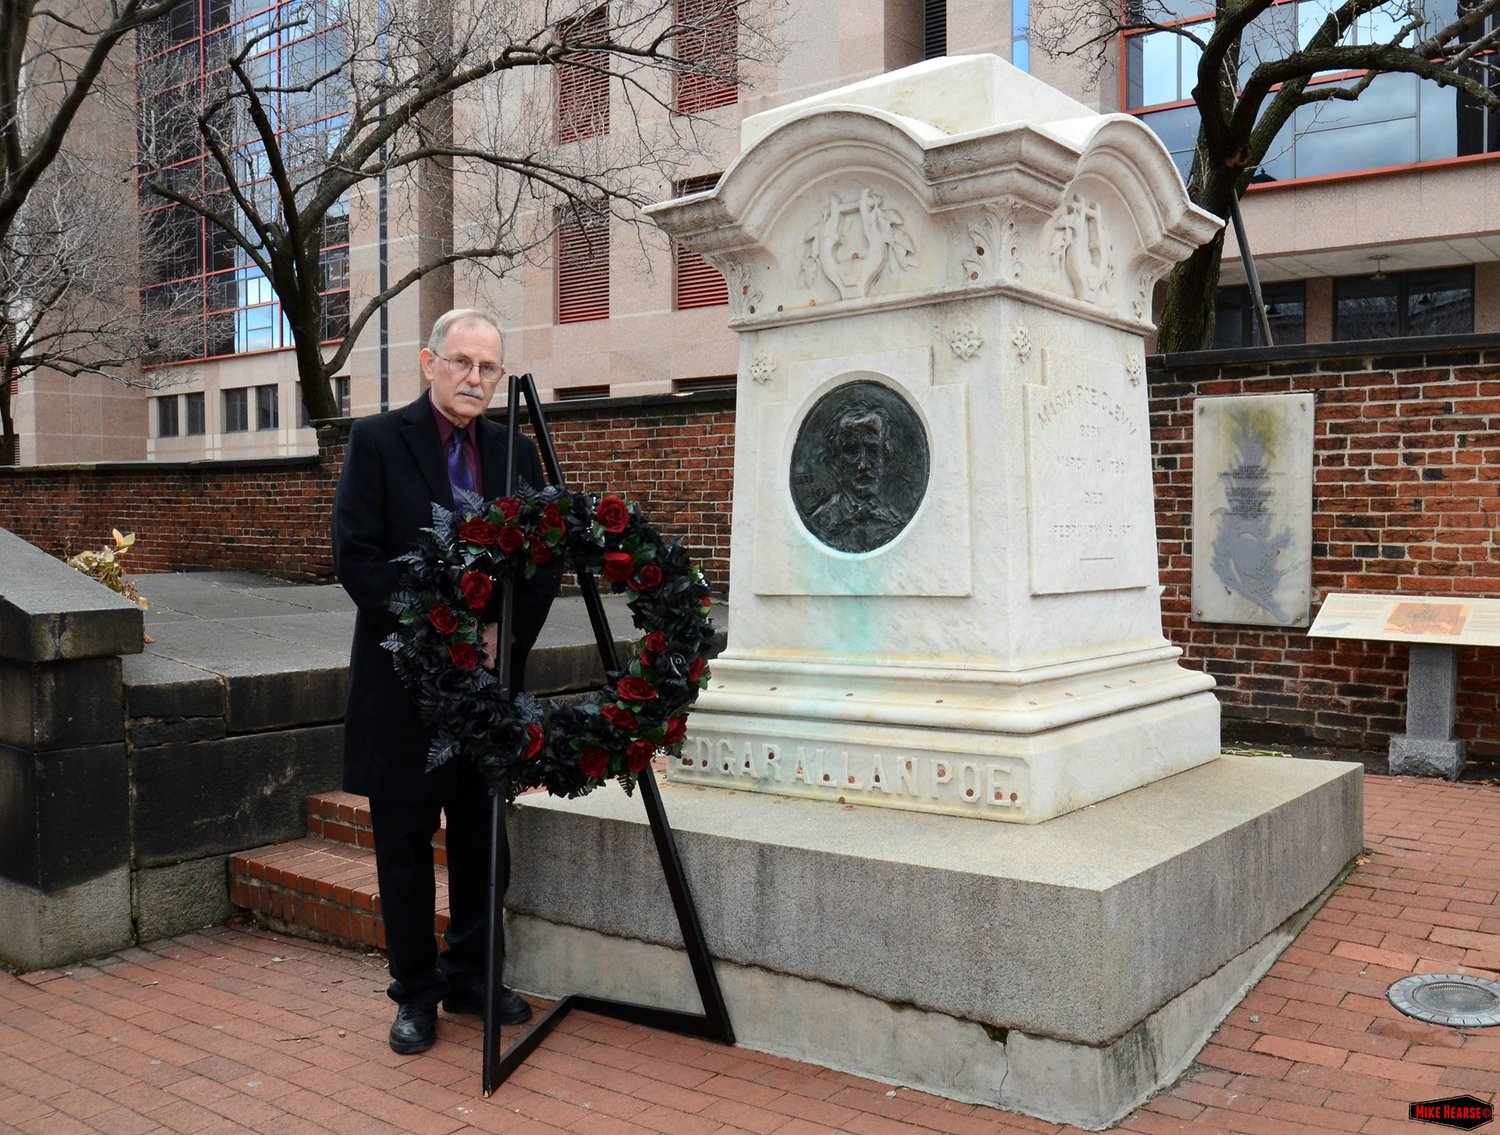 Jeff Jerome plans to broadcast a portion of this year’s event live from the Poe Monument in Baltimore.